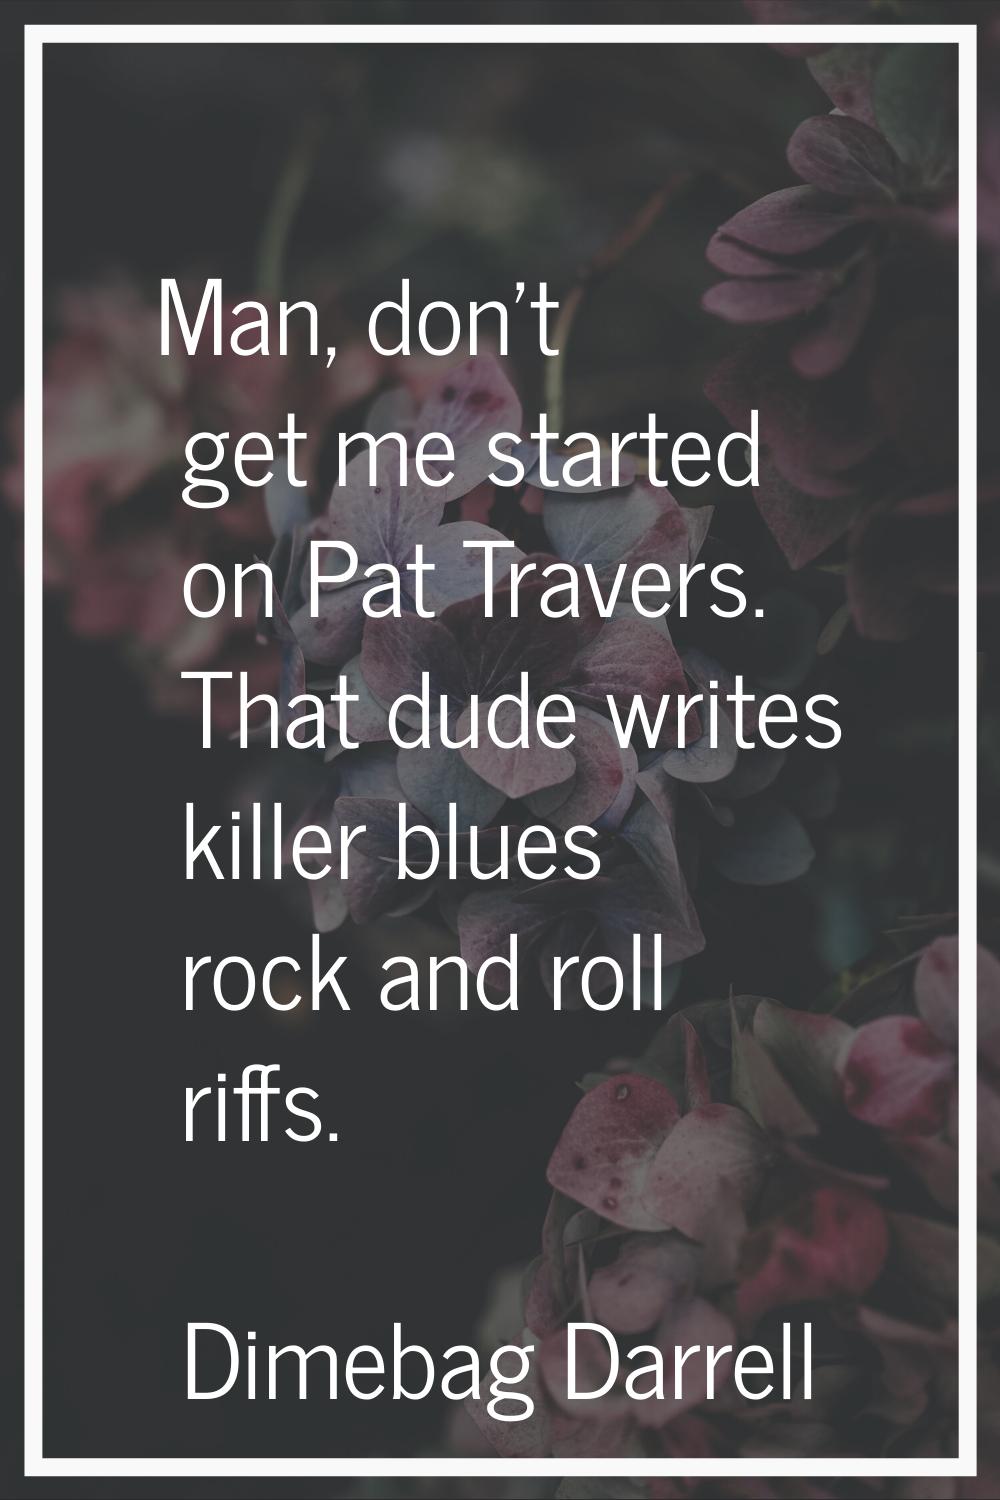 Man, don't get me started on Pat Travers. That dude writes killer blues rock and roll riffs.